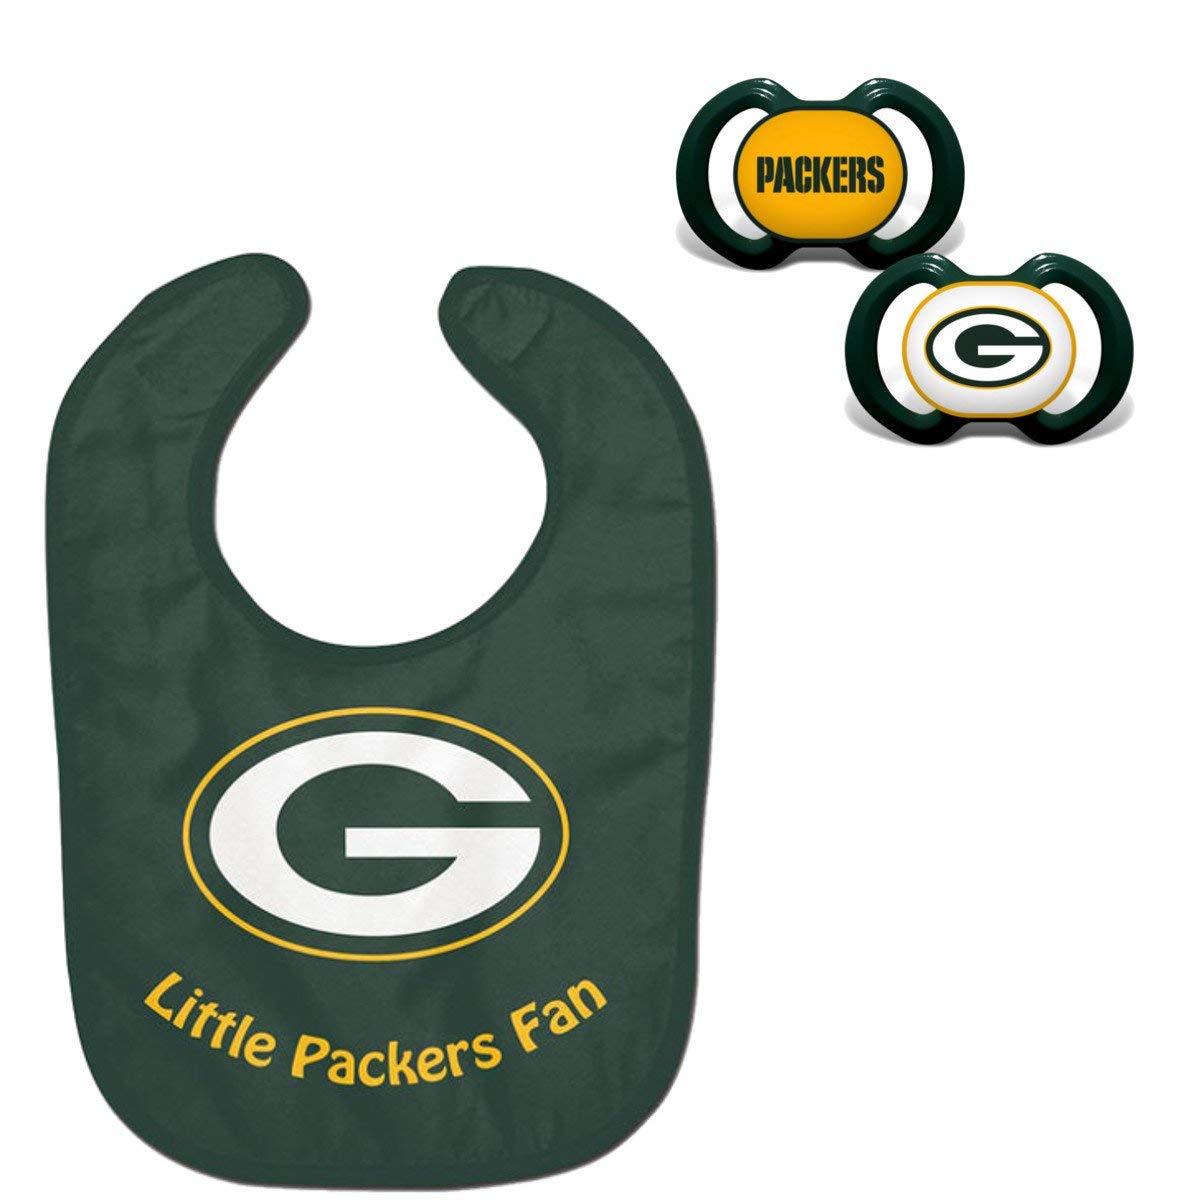 Official NFL Fan Shop Authentic Baby Pacifier and Bib Bundle Set. Start Out Early in Joining The Fan Club and Show Support for Your Favorite Football Team